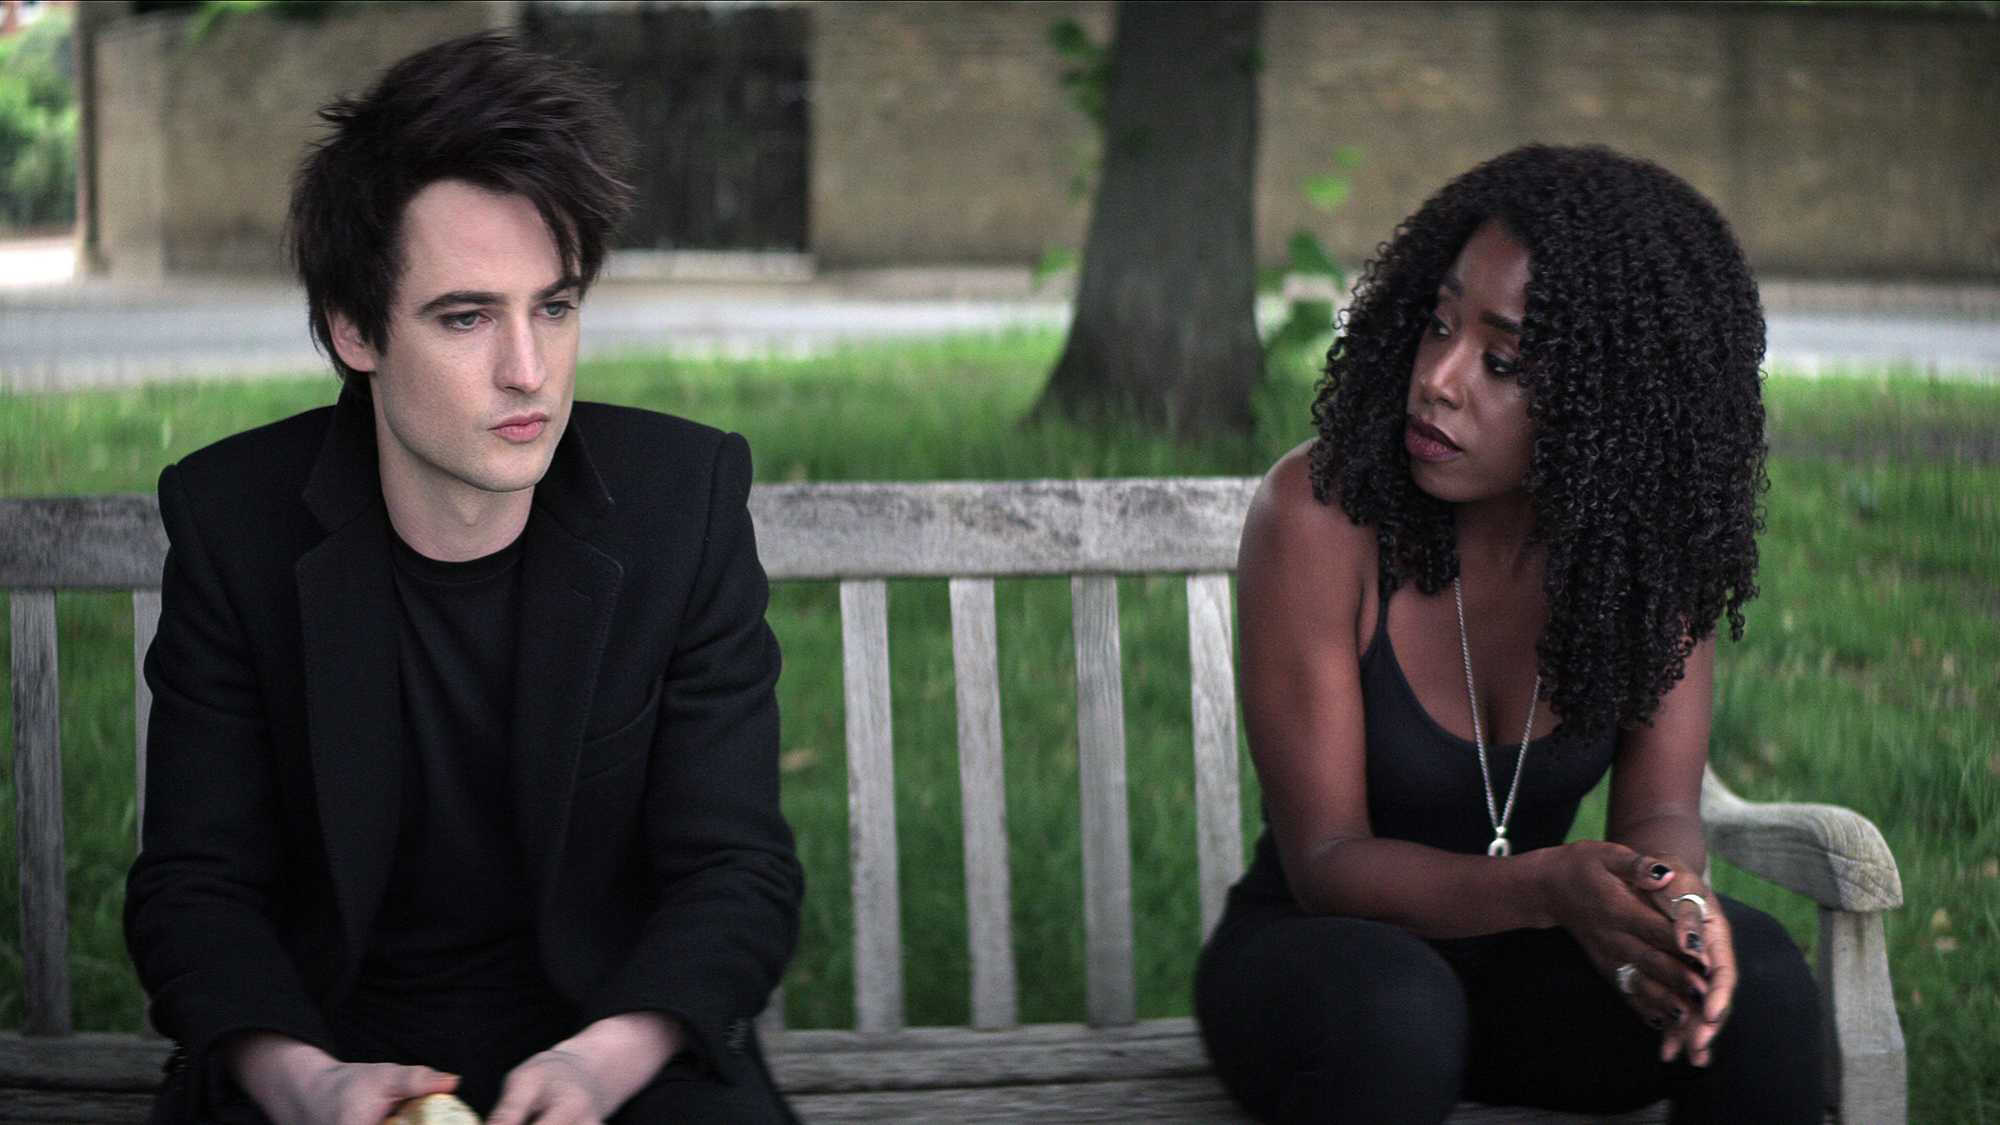 (L to R) Tom Sturridge as Dream, Kirby Howell-Baptiste as Death, on a bench, in The Sandman